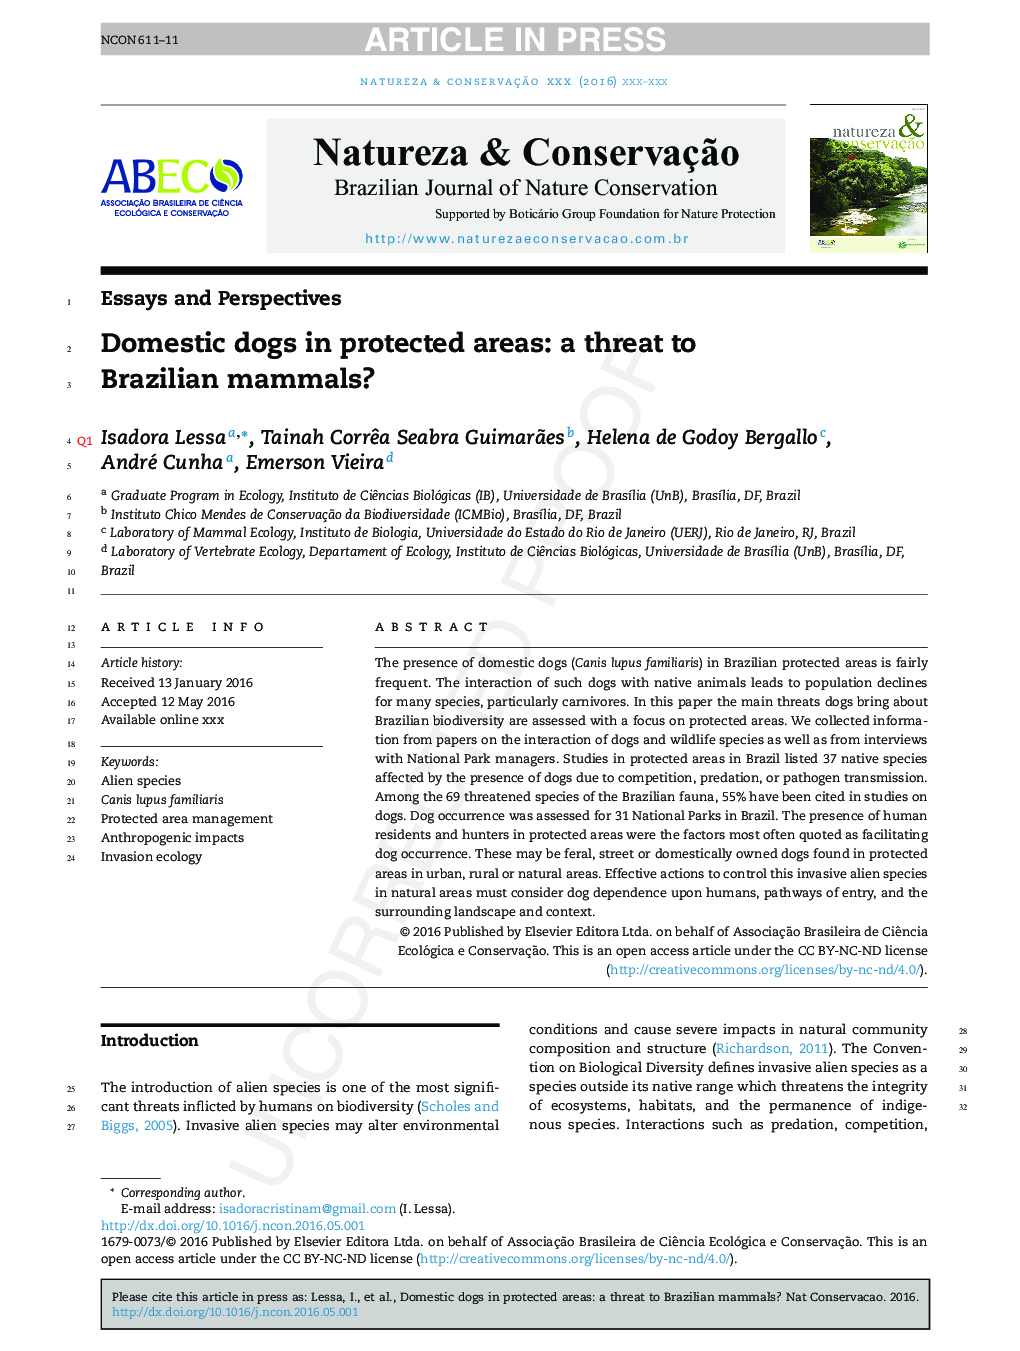 Domestic dogs in protected areas: a threat to Brazilian mammals?